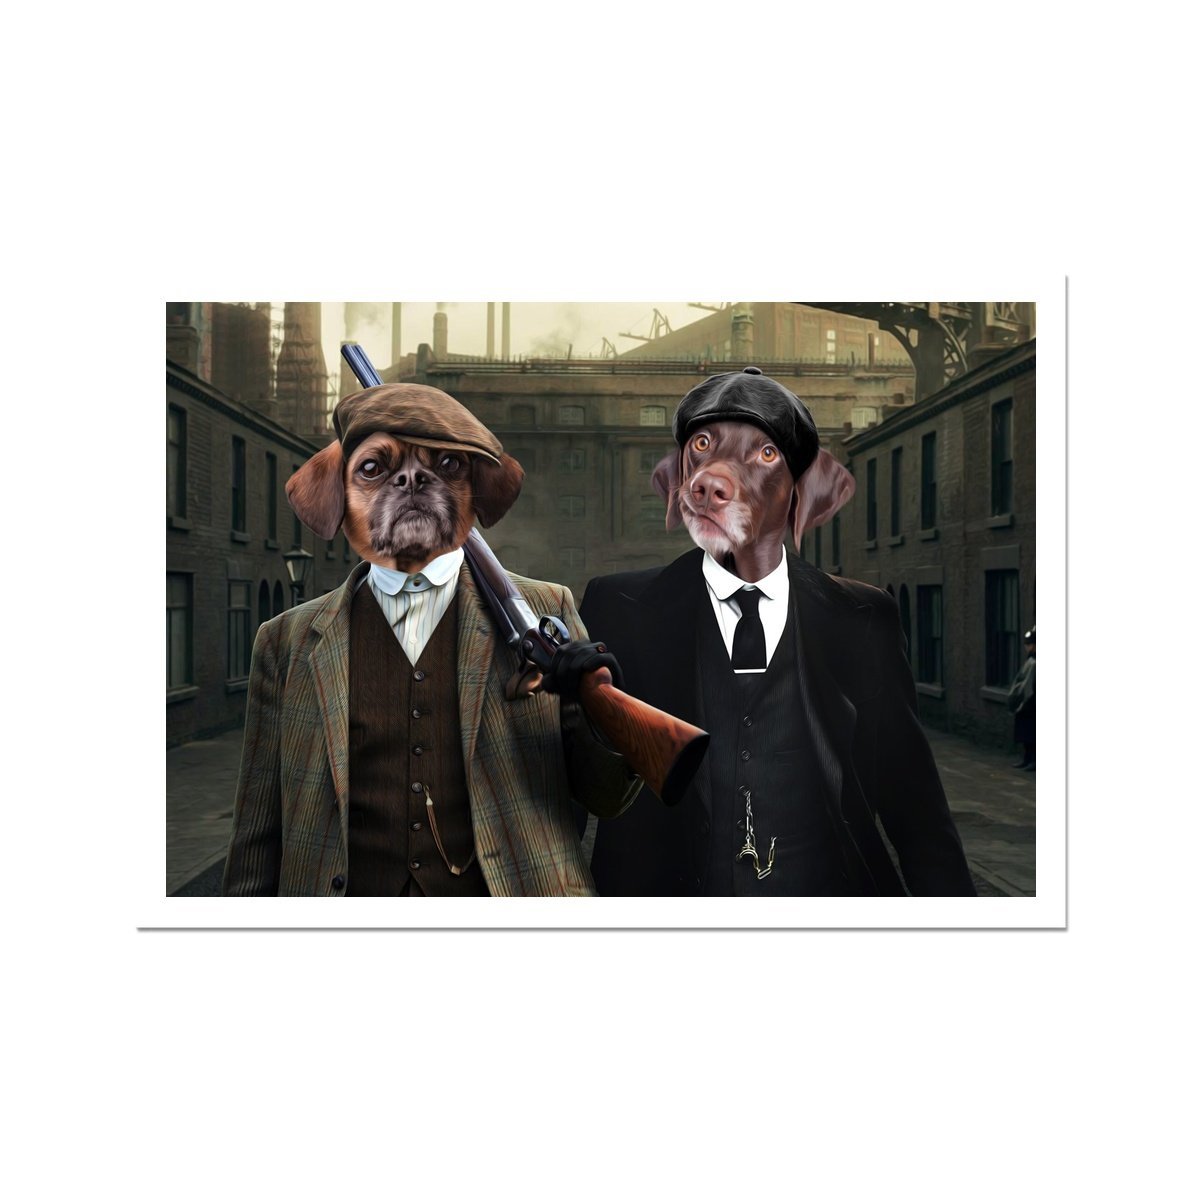 The 2 Brothers (Peaky Blinders Inspired): Custom Pet Poster - Paw & Glory - #pet portraits# - #dog portraits# - #pet portraits uk#Paw & Glory, paw and glory, for pet portraits, professional pet photos, minimal dog art, dog portraits near me my pet painting, pet portraits